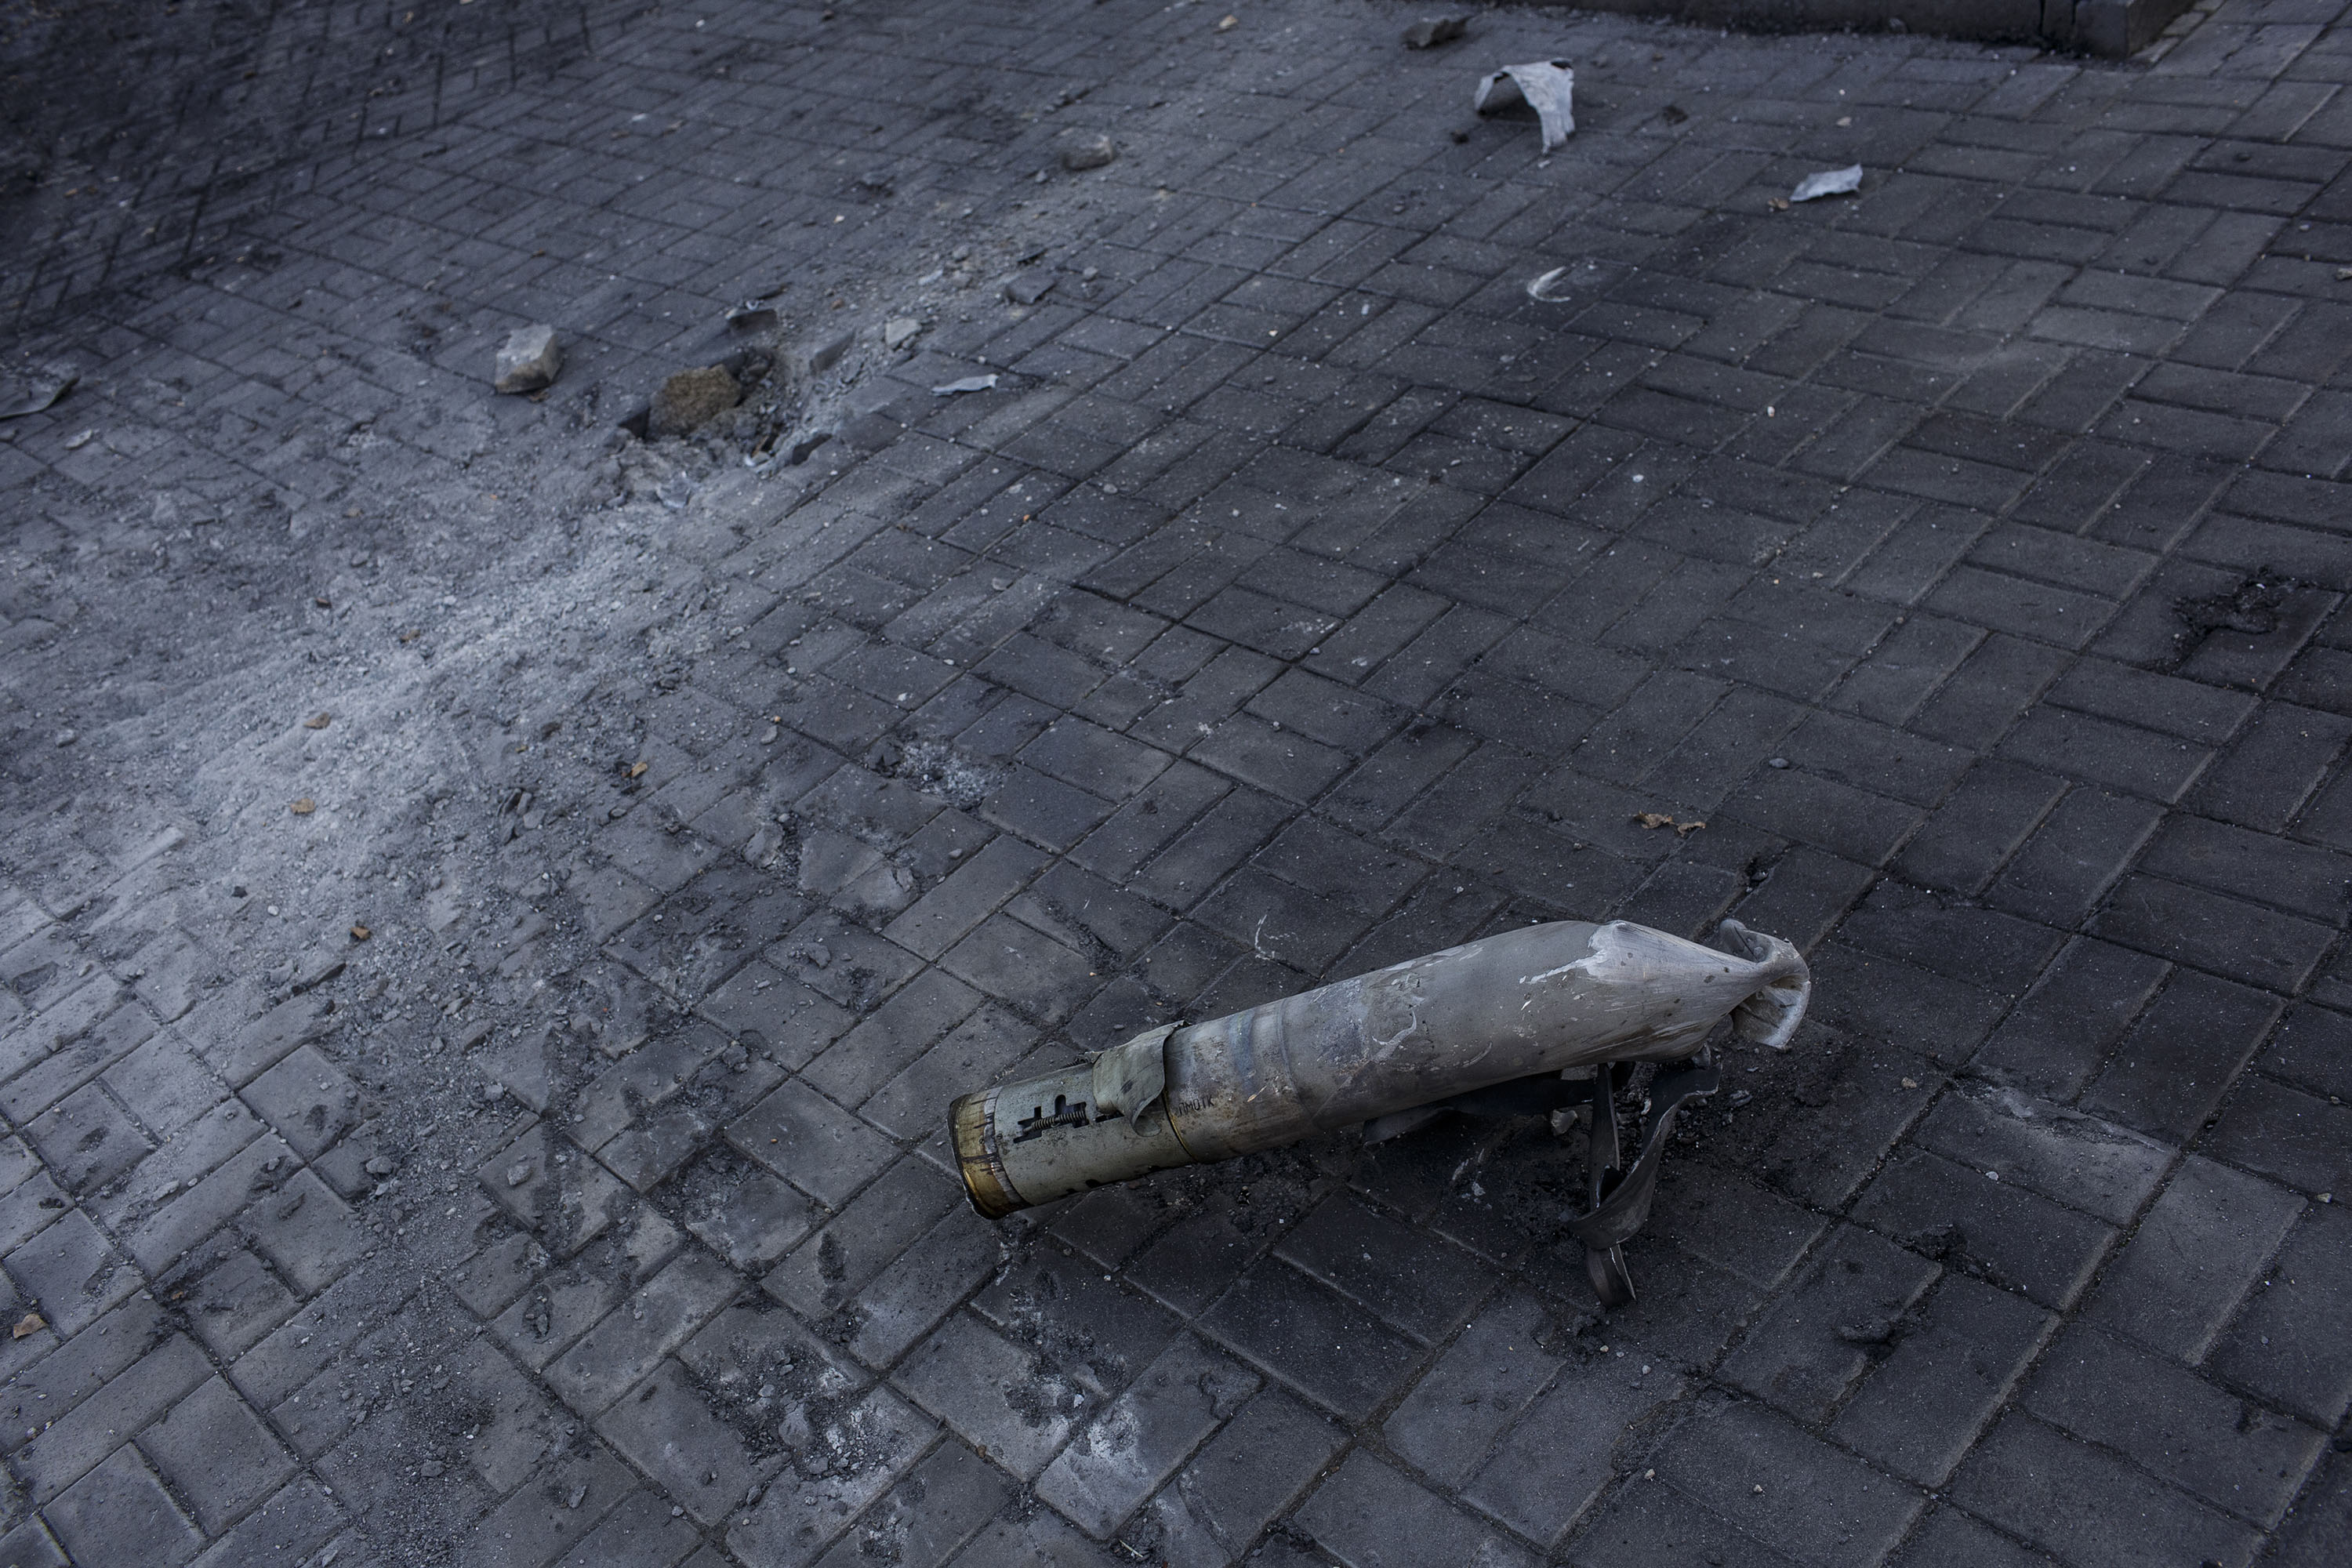 A fragment of a rocket is seen after Russian shelling in Bakhmut, Ukraine on February 10.